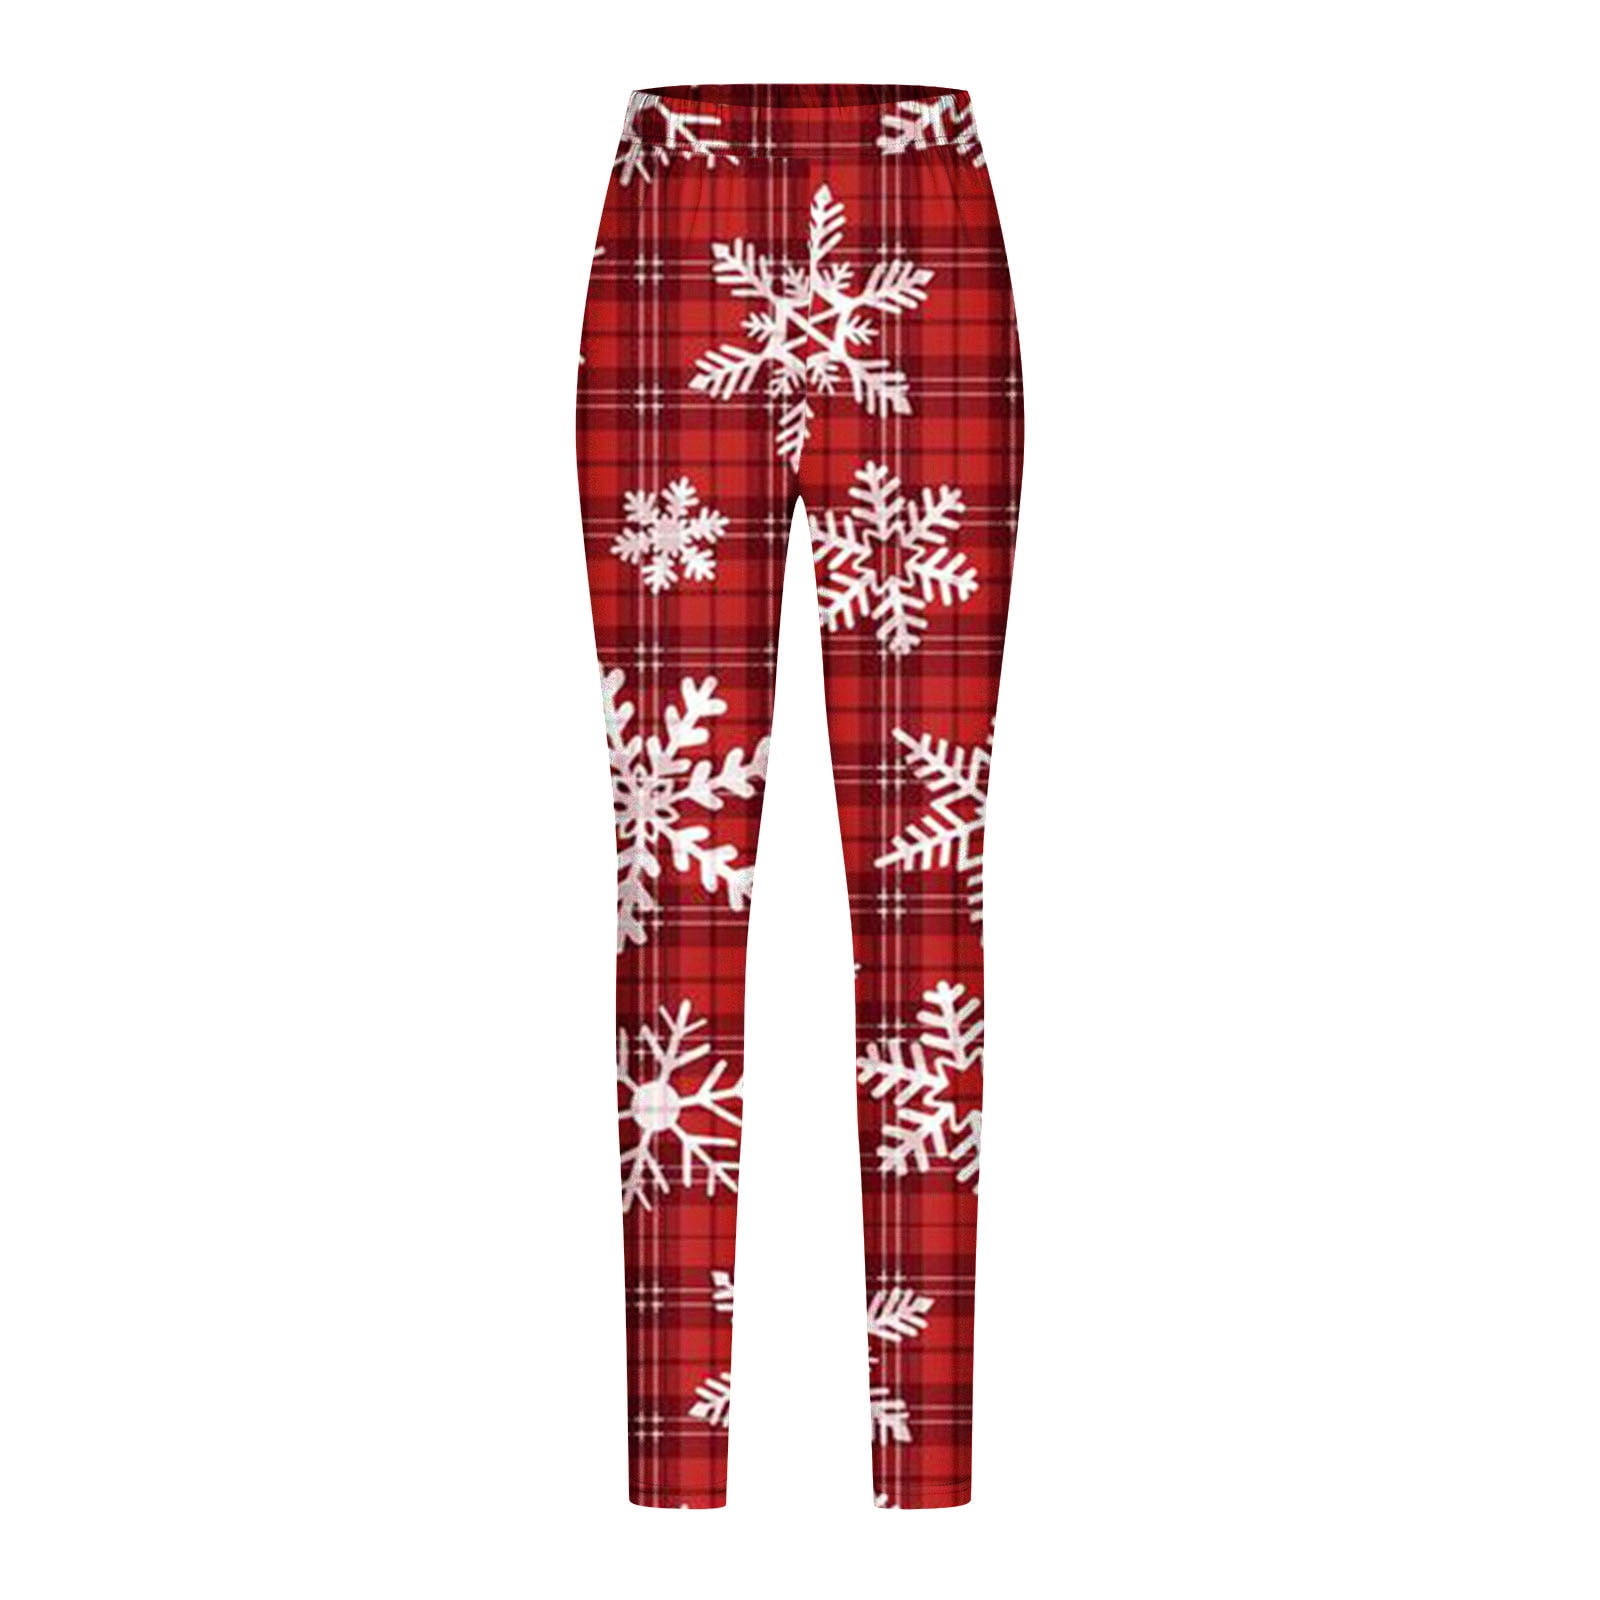 DeHolifer Christmas Leggings for Women Plus Size High Waist Workout Pants  Tummy Control Printed Holiday Legging Tights Yoga Pants Red L 